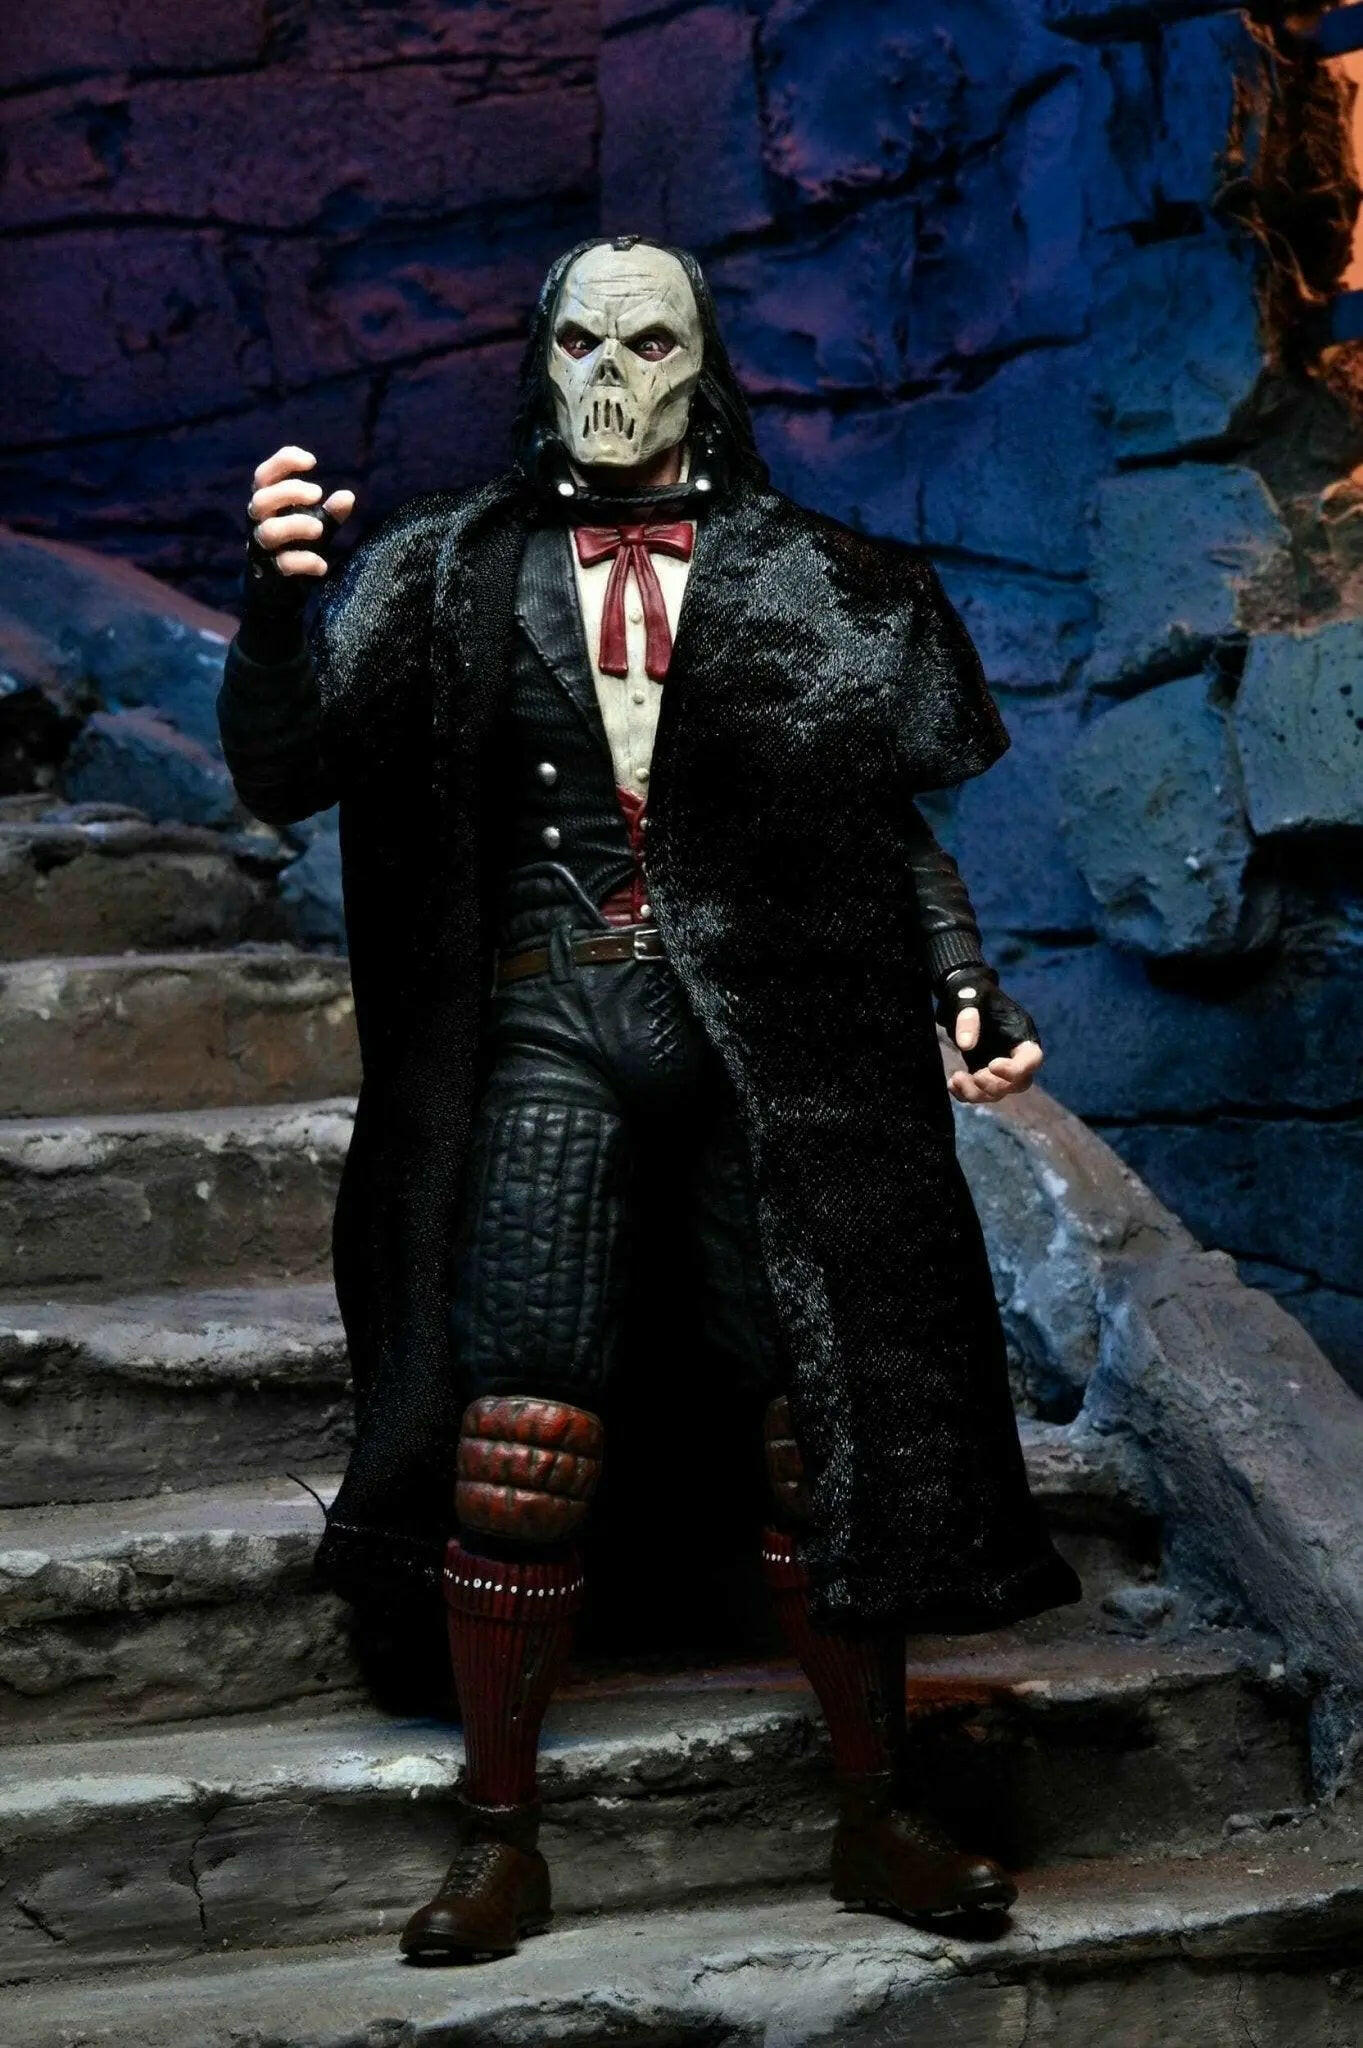 NECA Universal Monsters x TMNT Actionfigur Ultimate Casey as Phantom of the Opera 18cm - Toy-Storage